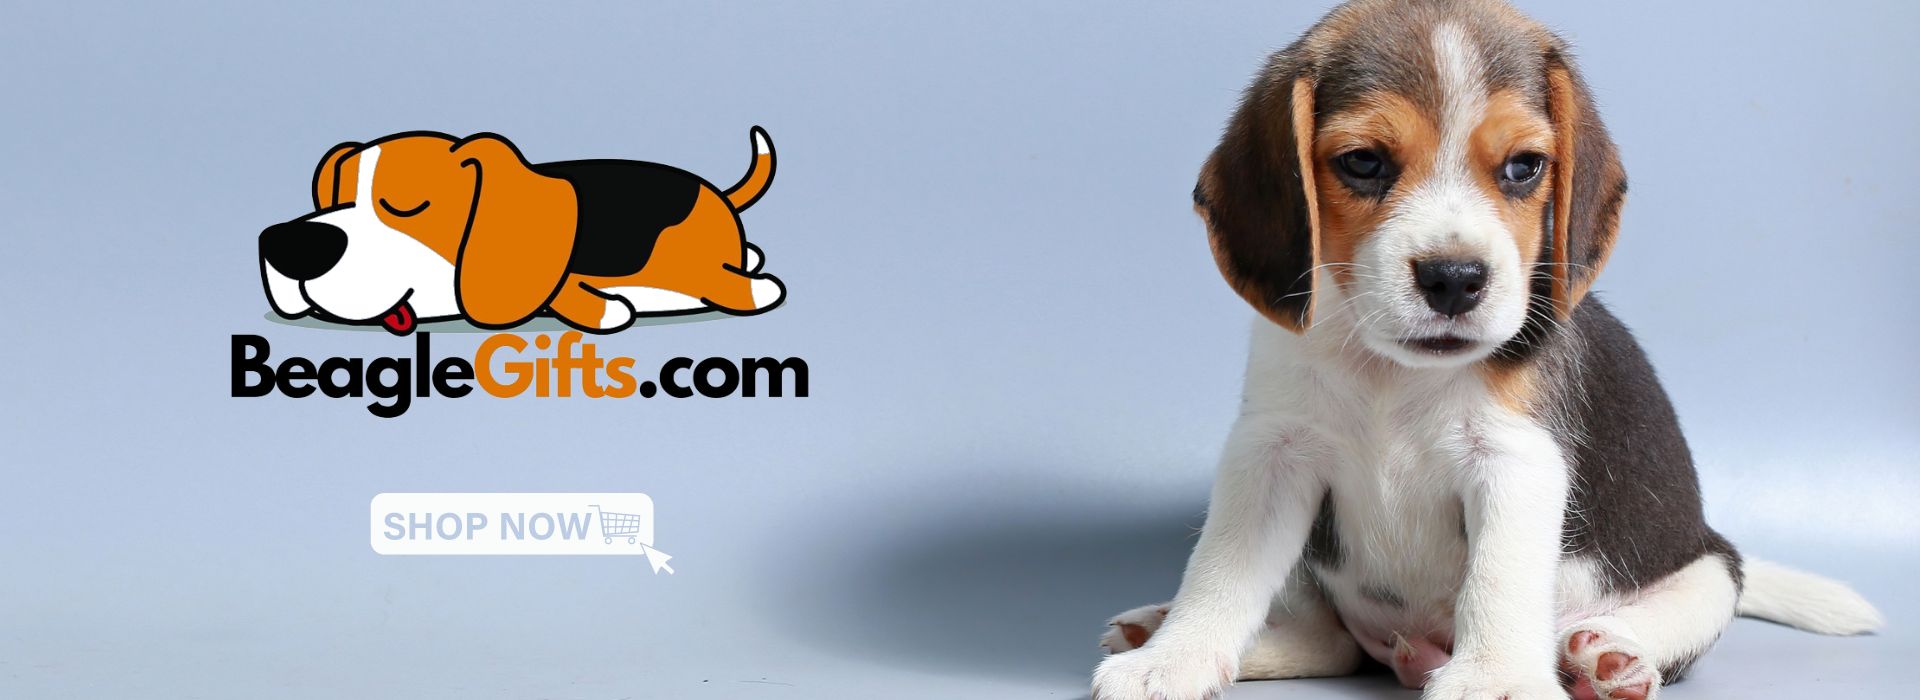 Beagle Gifts Store Banner